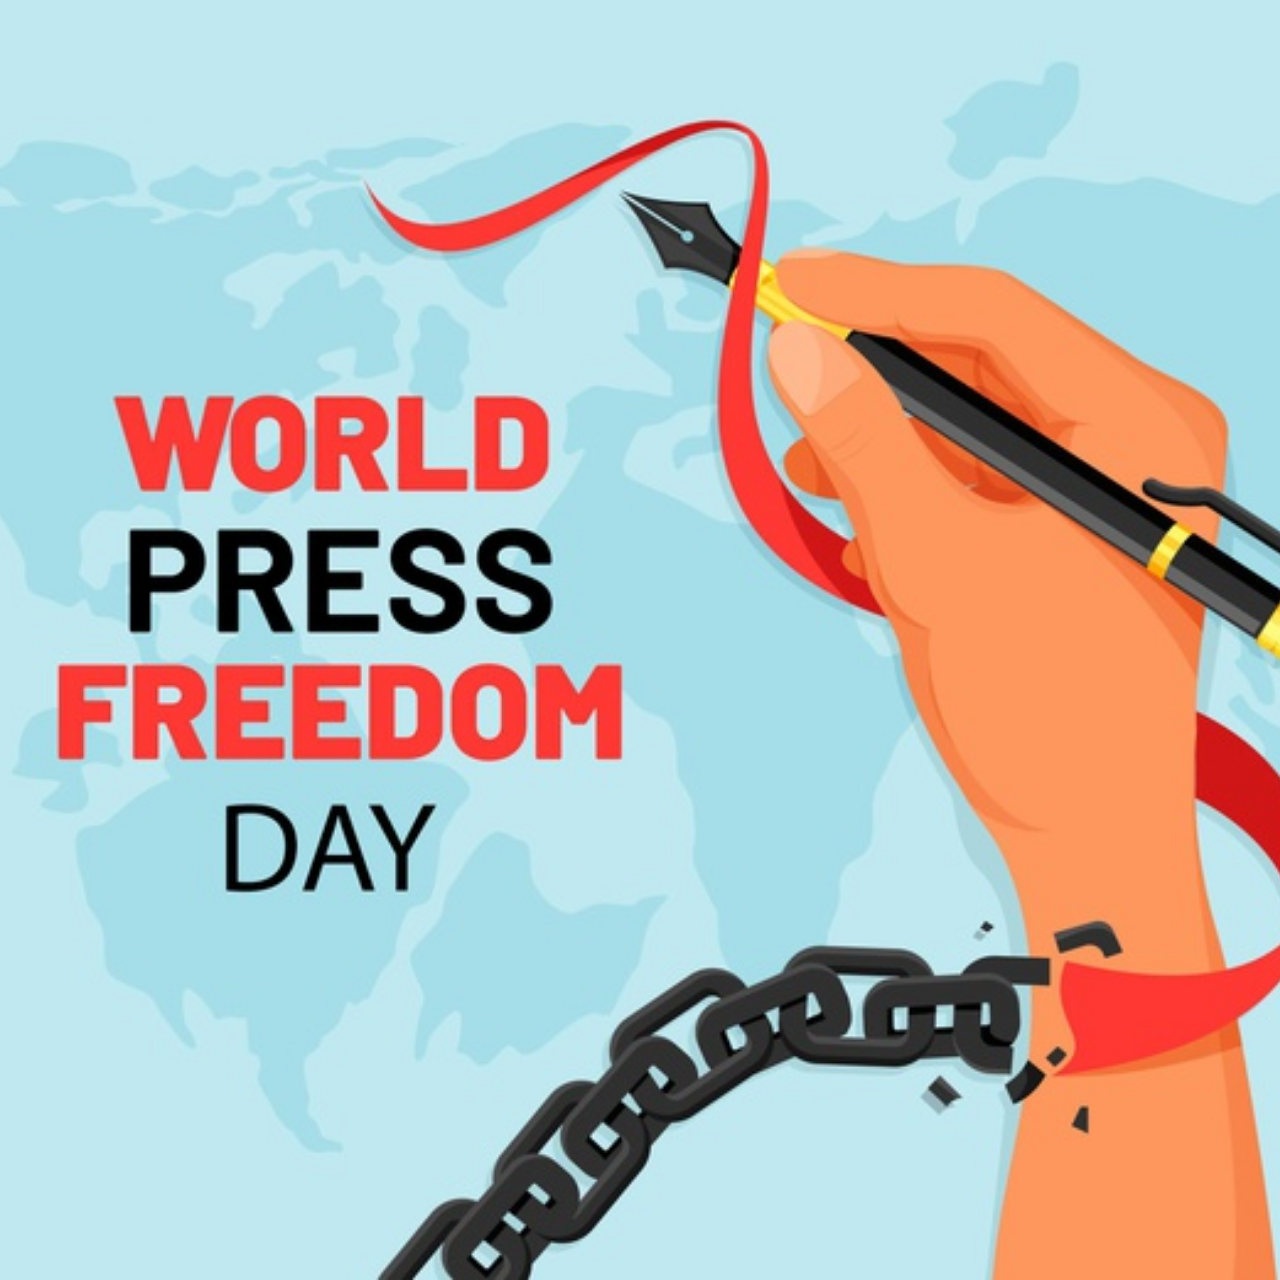 World Press Freedom Day 2021 Theme, Quotes, Wishes, Poster, Images (Photos) to share on World Press